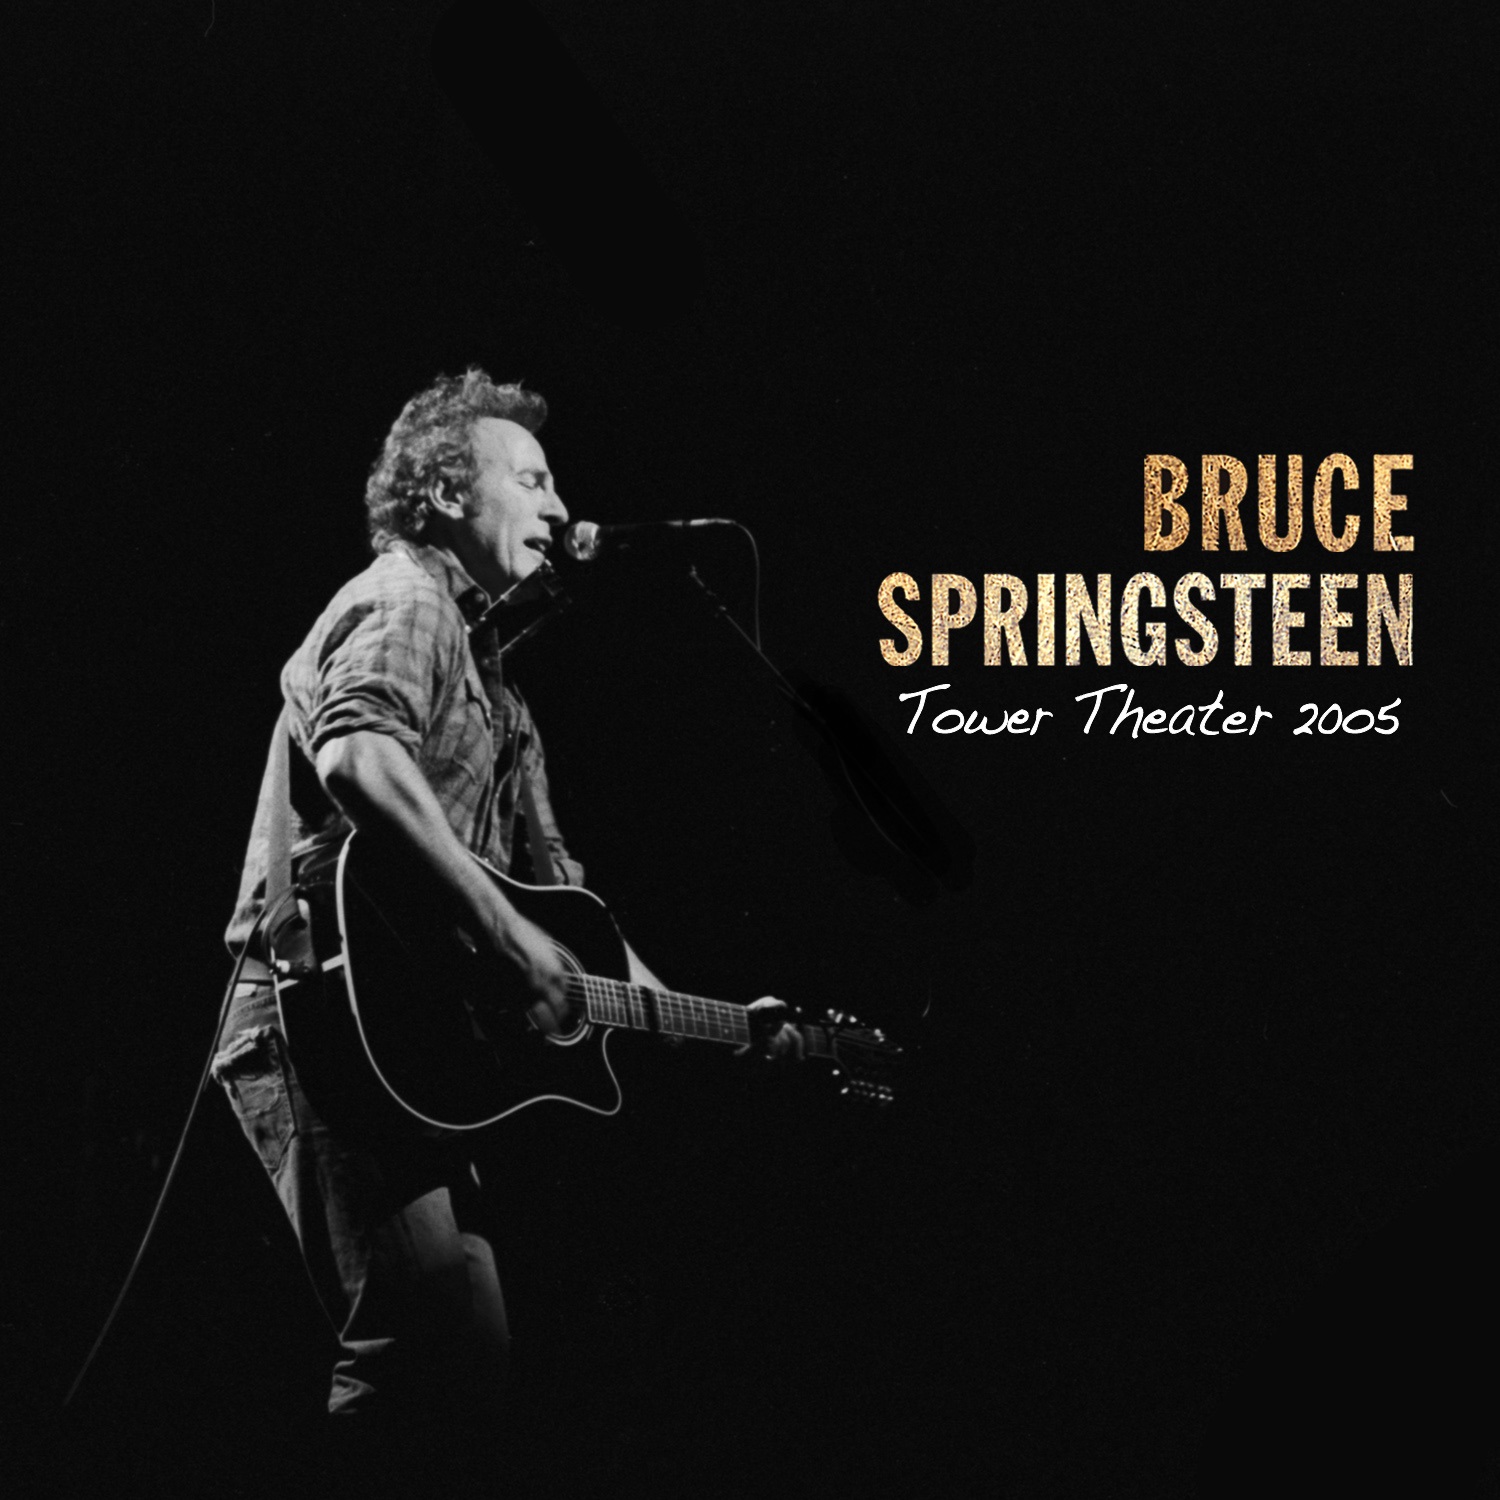 Bruce Springsteen – 2005-05-17 – Tower Theatre, Upper Darby, PA (2021) [FLAC 24bit/96kHz]